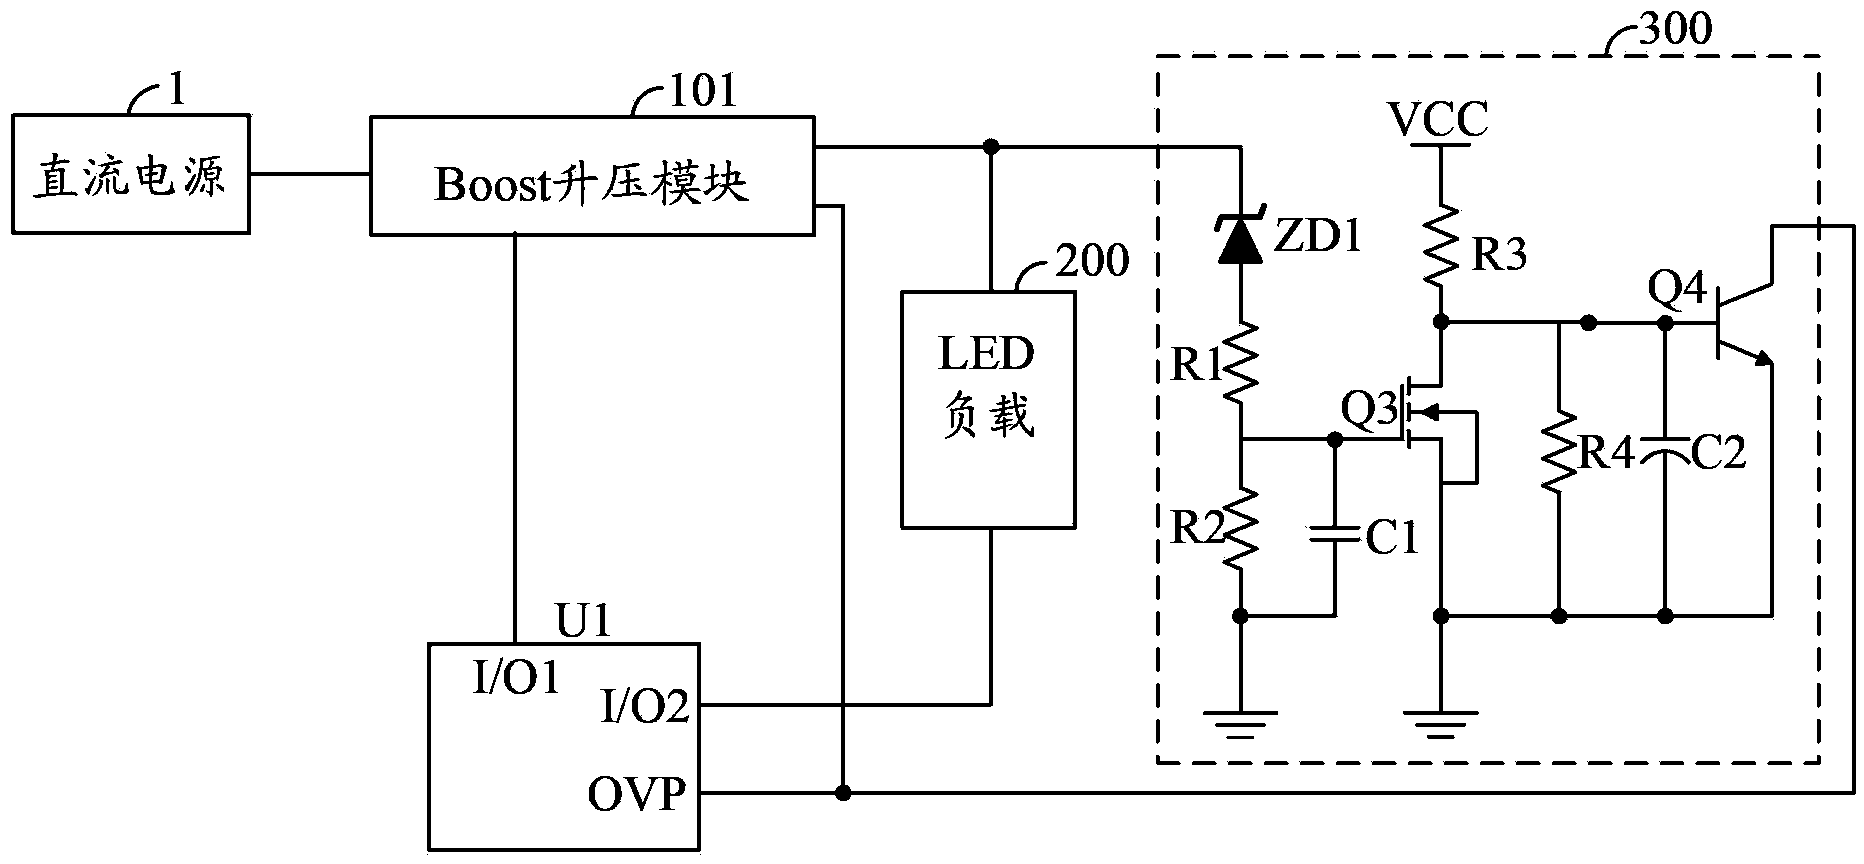 Light-emitting diode (LED) constant current driving circuit and LED lamp